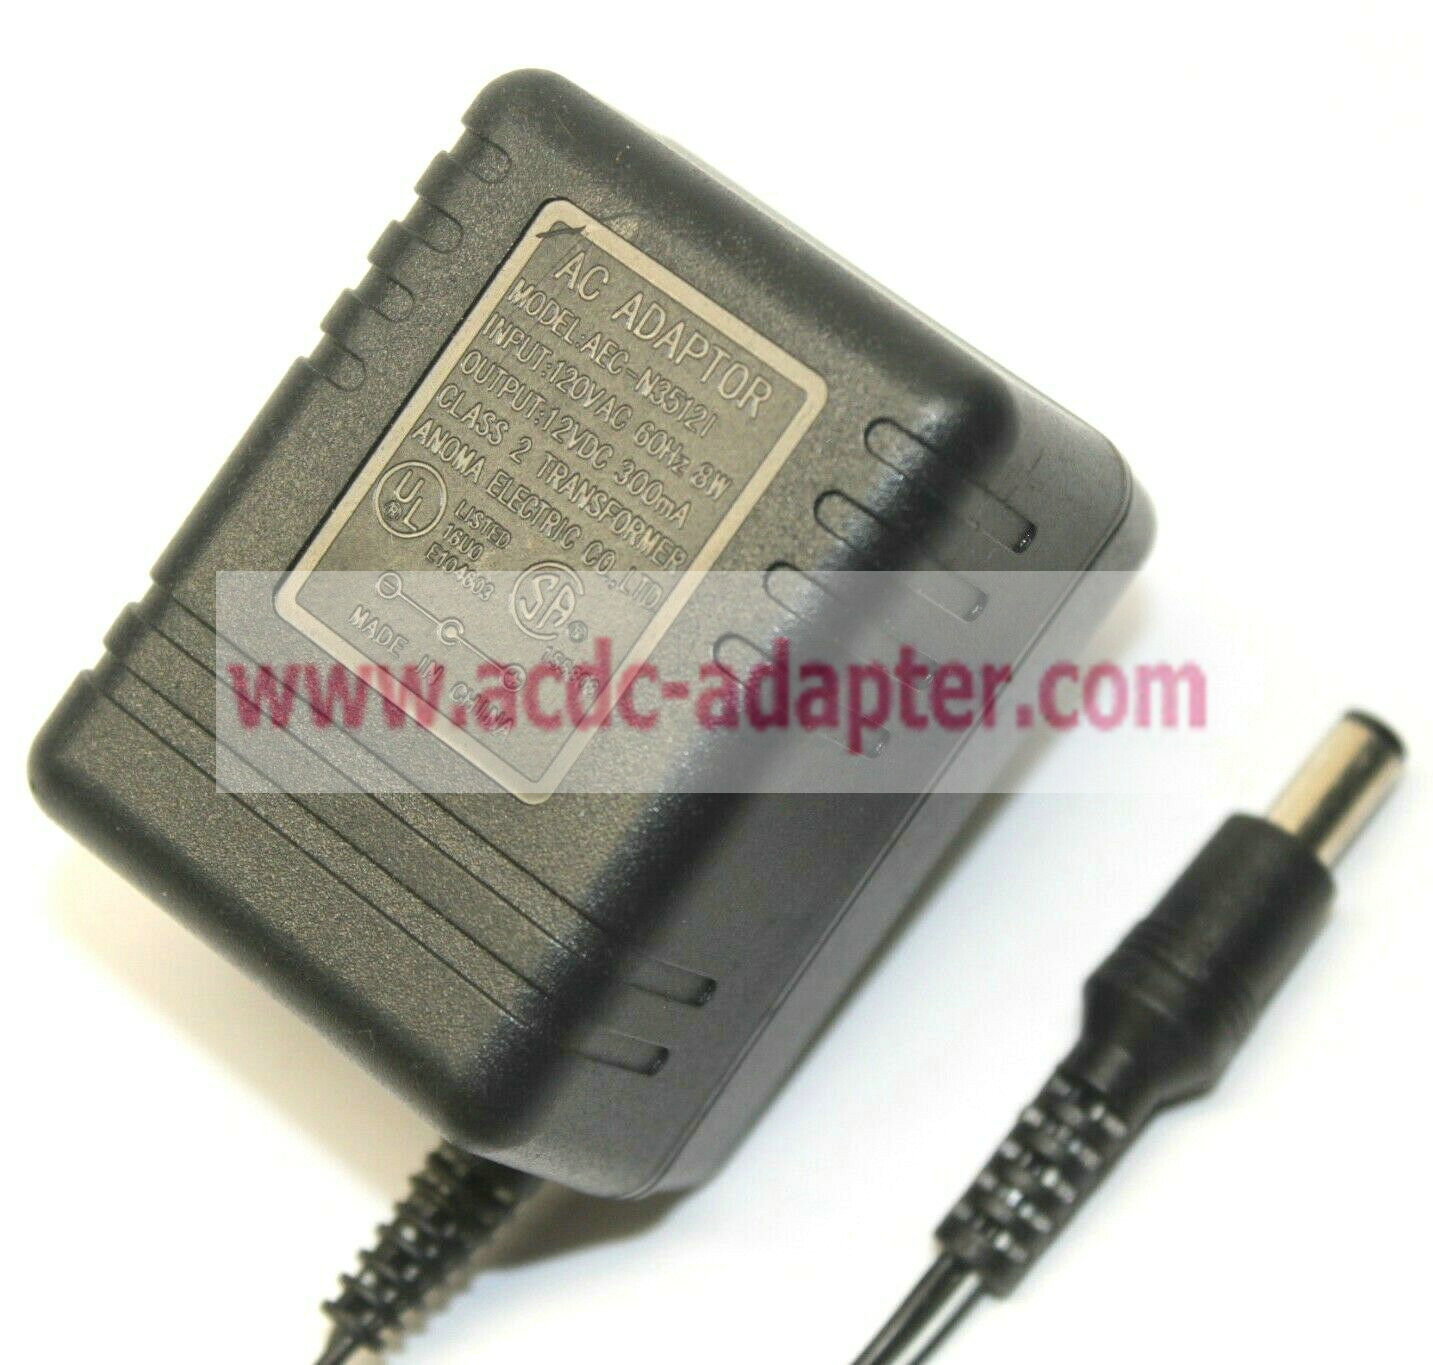 NEW Anoma Electric AEC-N35121 AC Adapter Power Supply Charger 12V 300mA Class 2